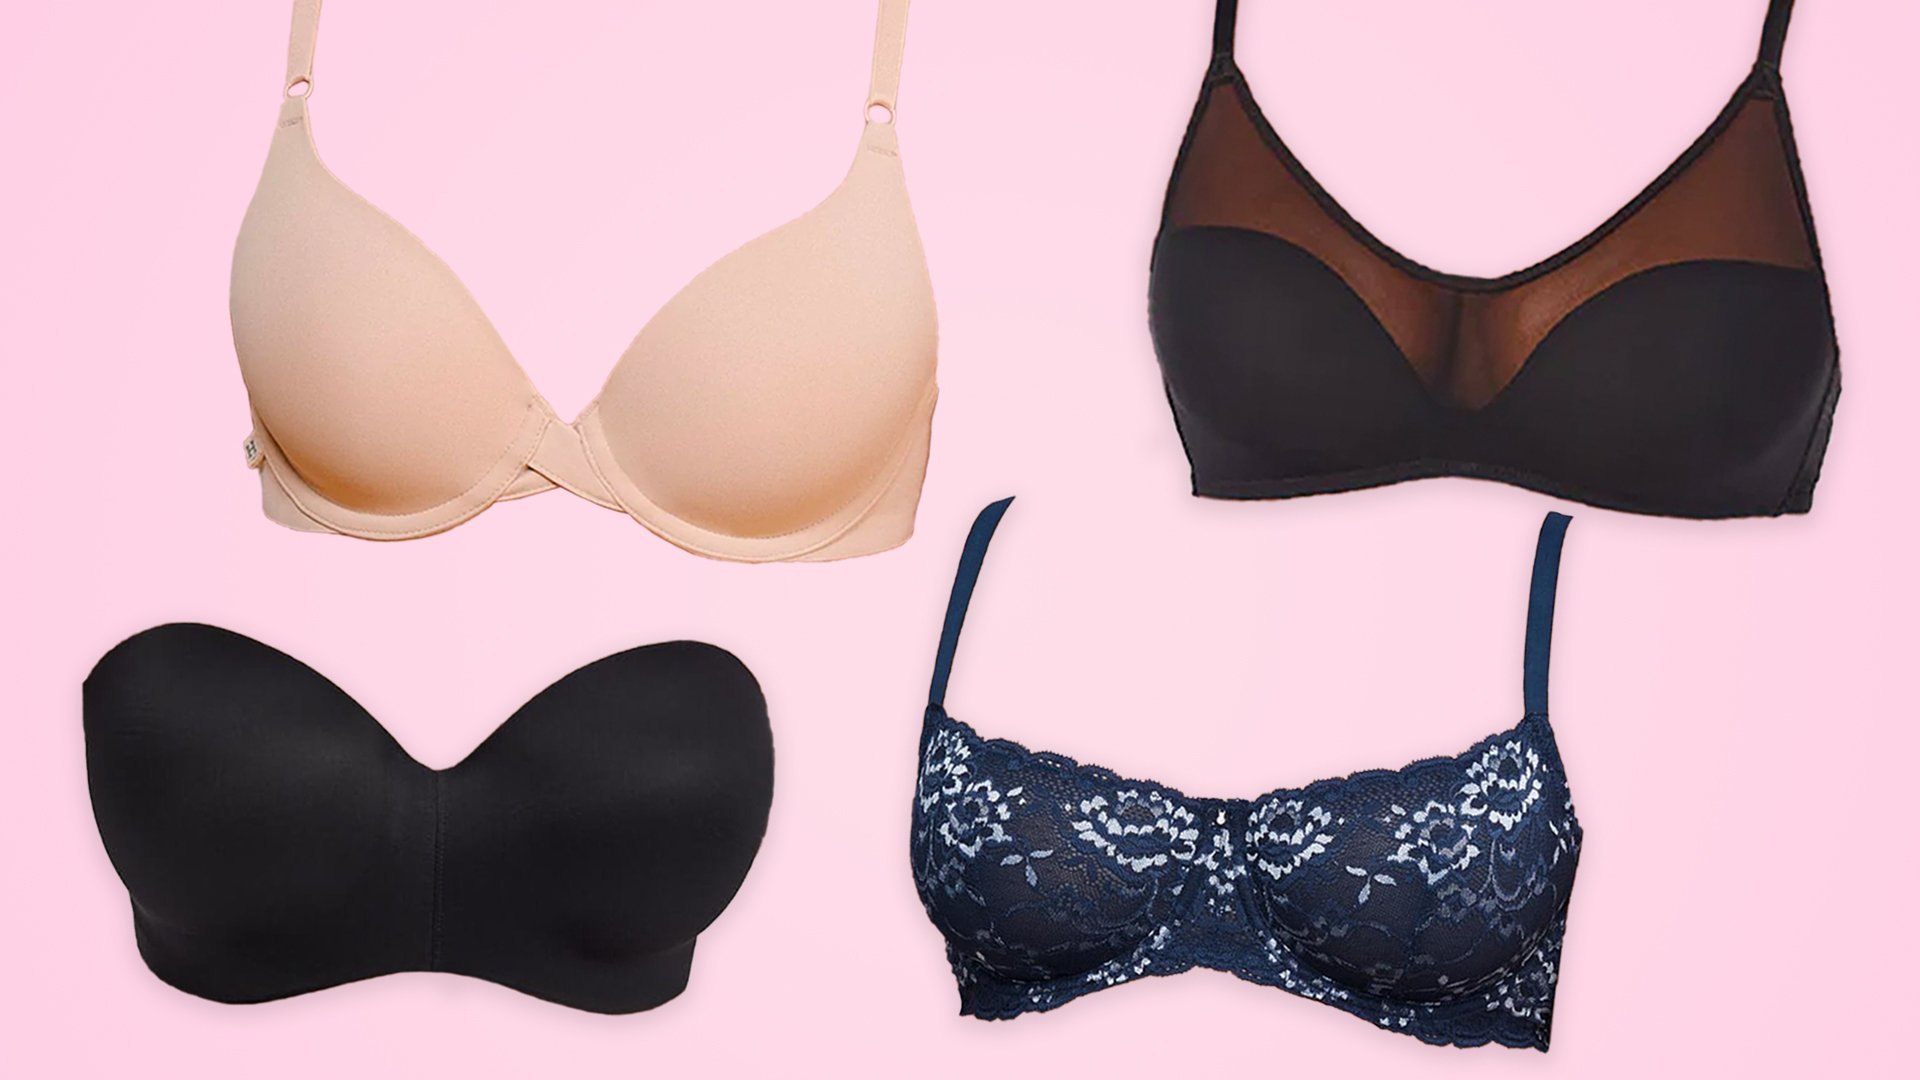 How To Find Your Bra Size: Video Guide - Hurray Kimmay